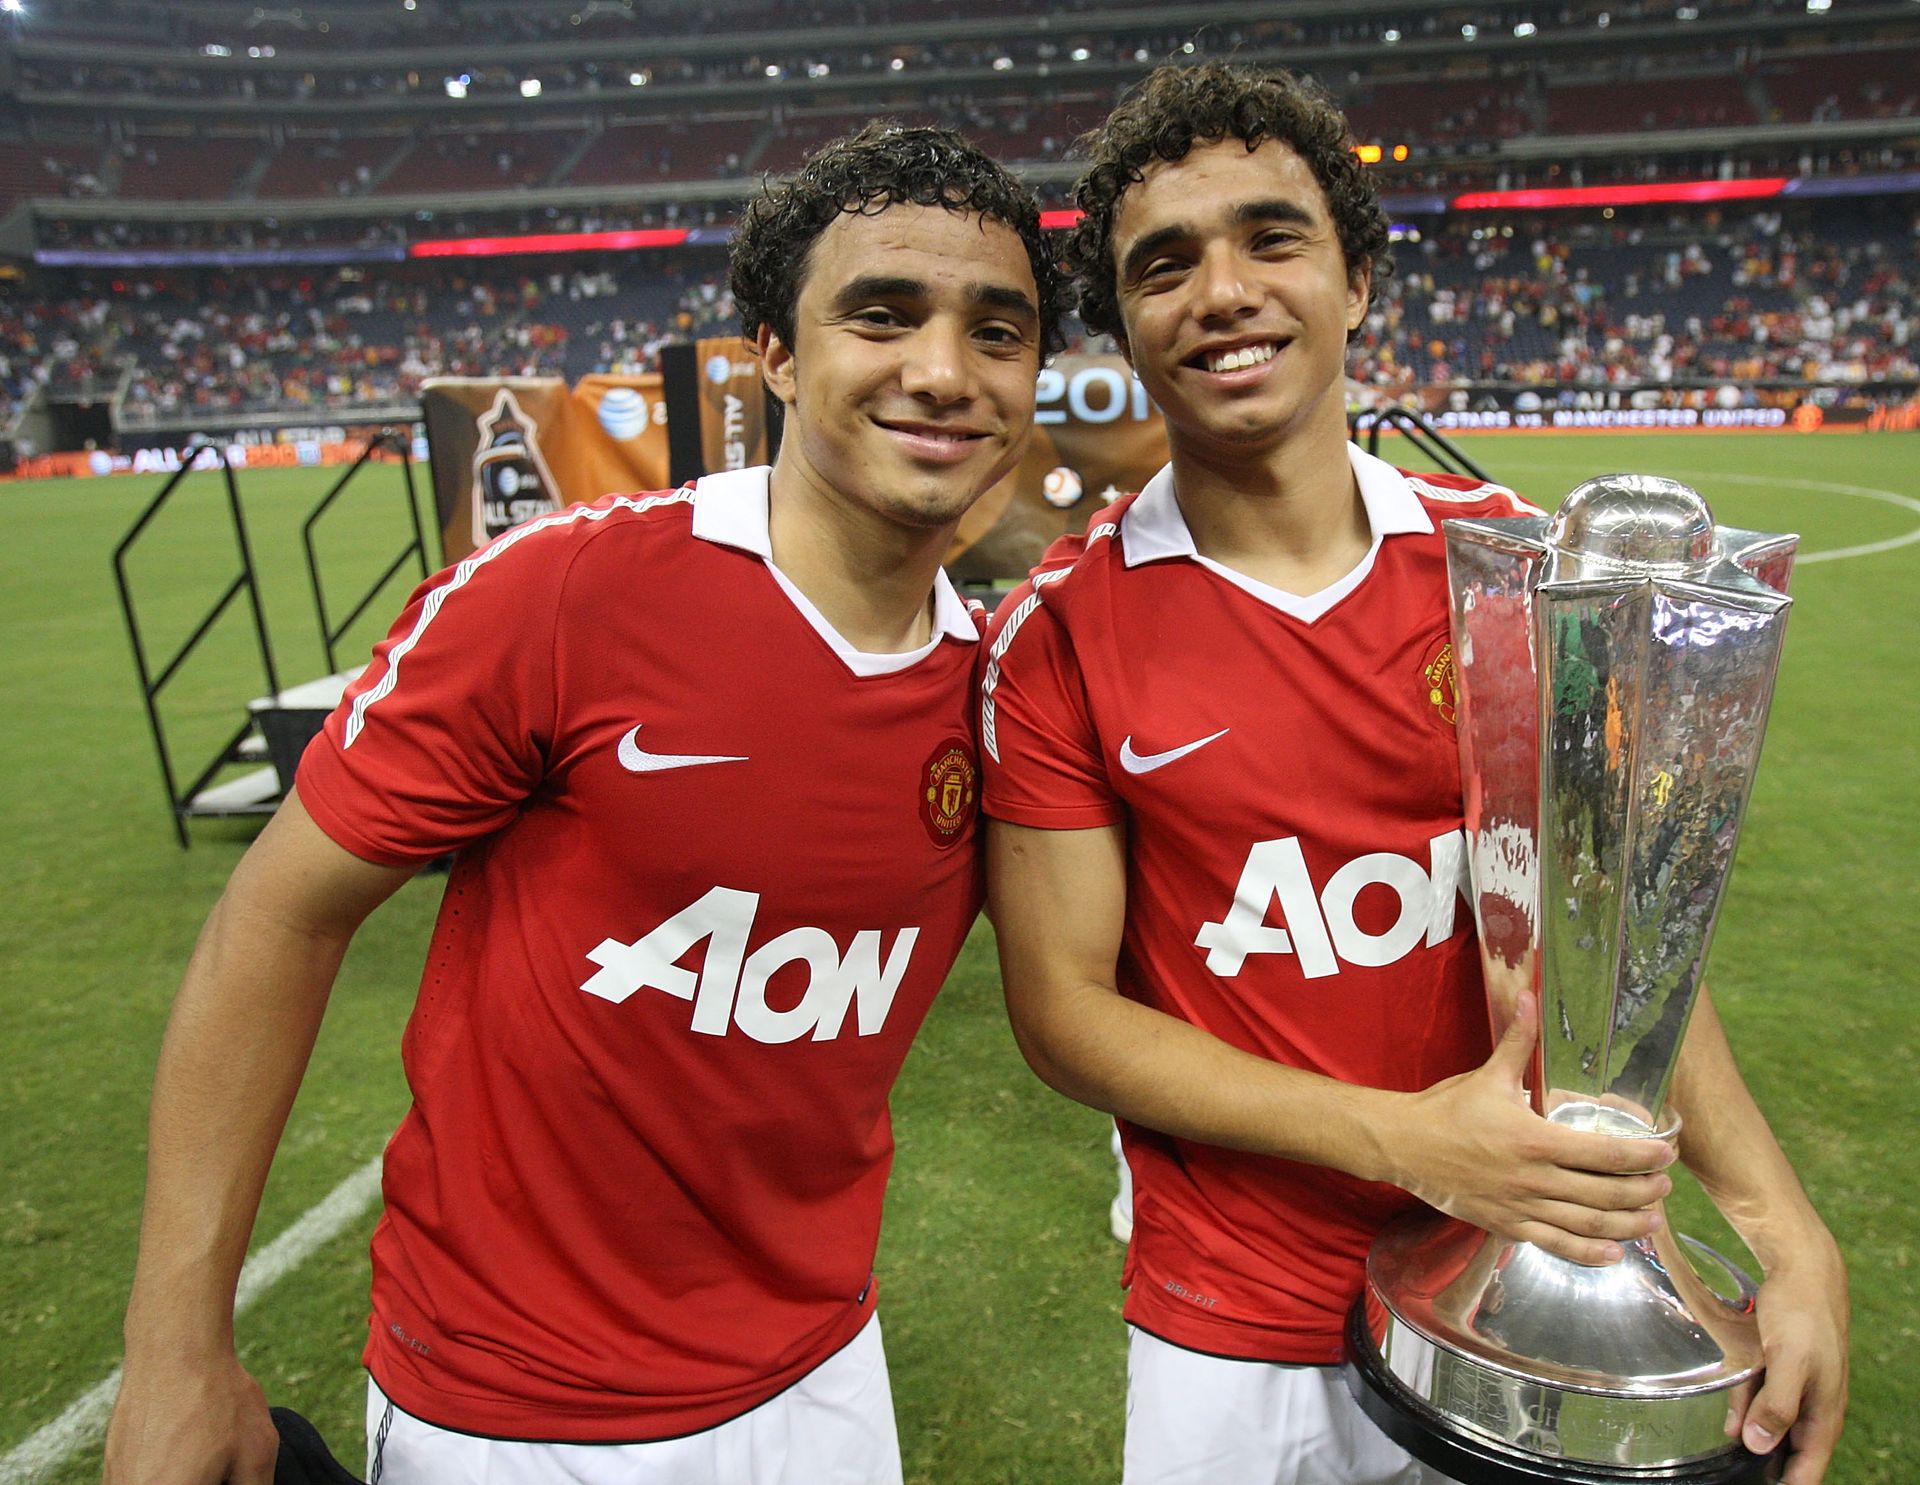 <p>                     Rafael and Fabio da Silva came through the youth ranks at Fluminense and signed for Manchester United in a joint deal in 2008.                   </p>                                      <p>                     Of the two twins, Rafael was more successful, going on to make 170 appearances in all competitions for United. Both full-backs won two caps for Brazil.                   </p>